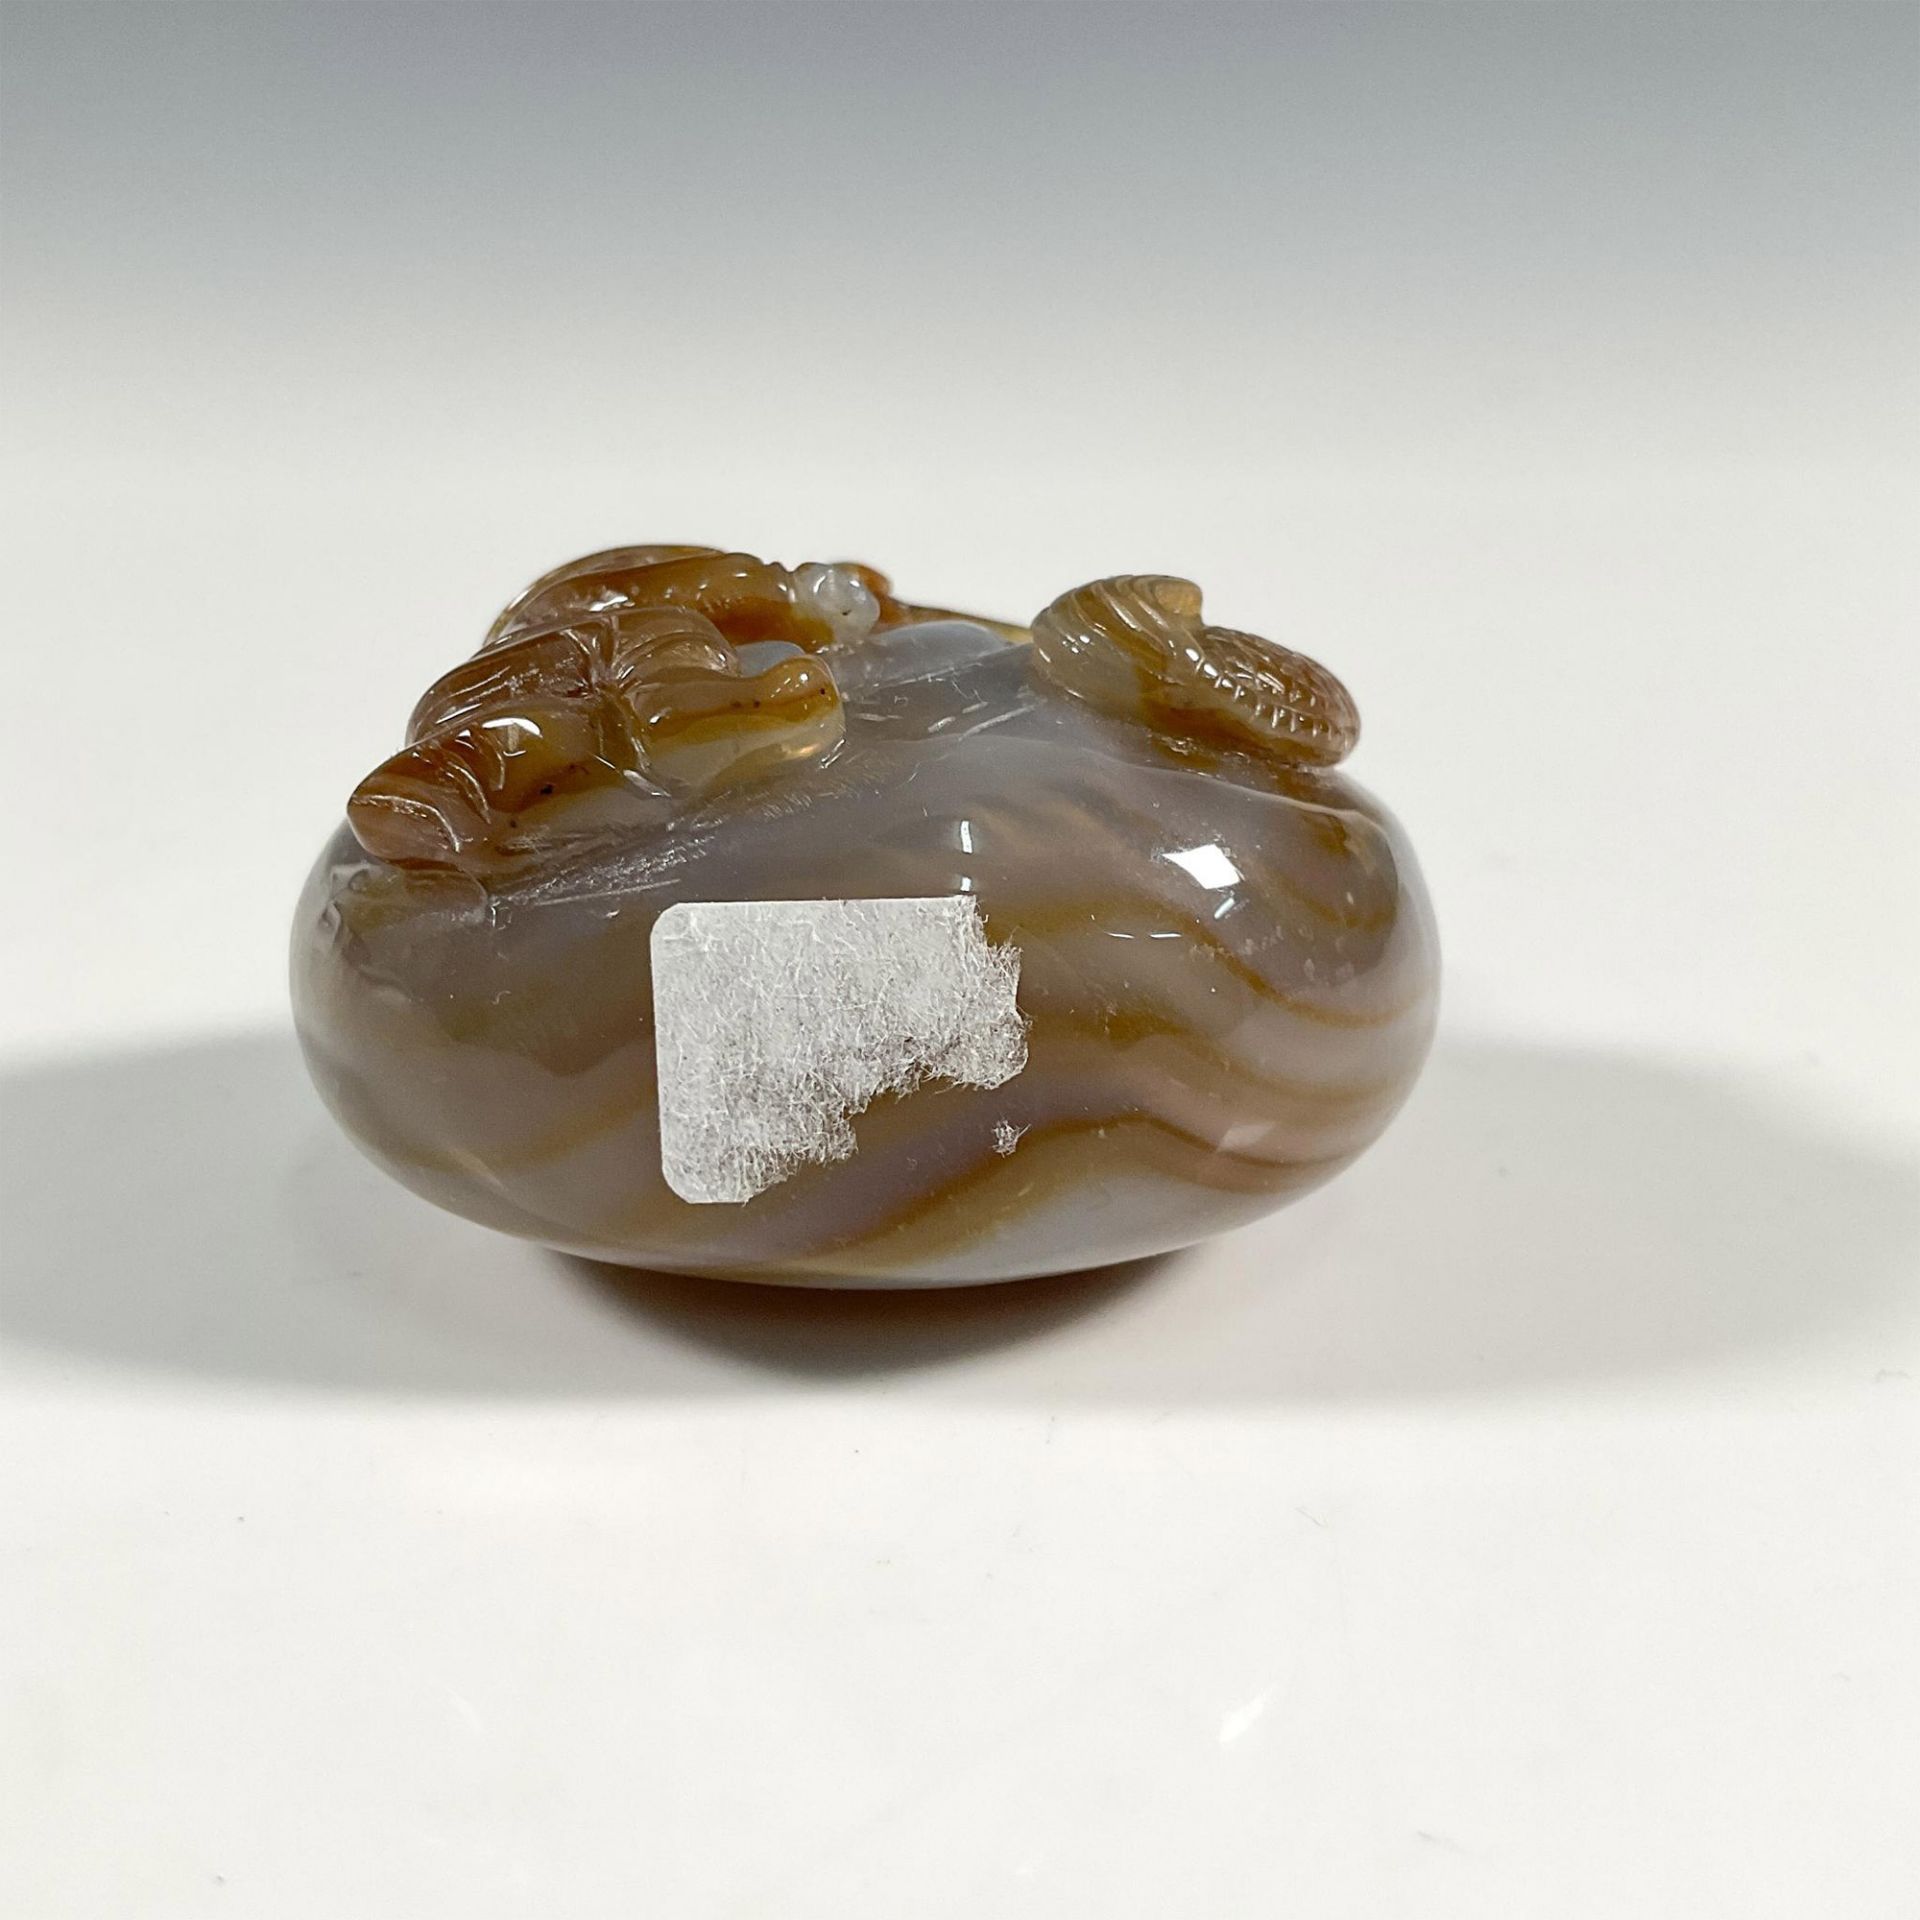 Chinese Carved Agate Stone Snuff Bottle - Image 3 of 3